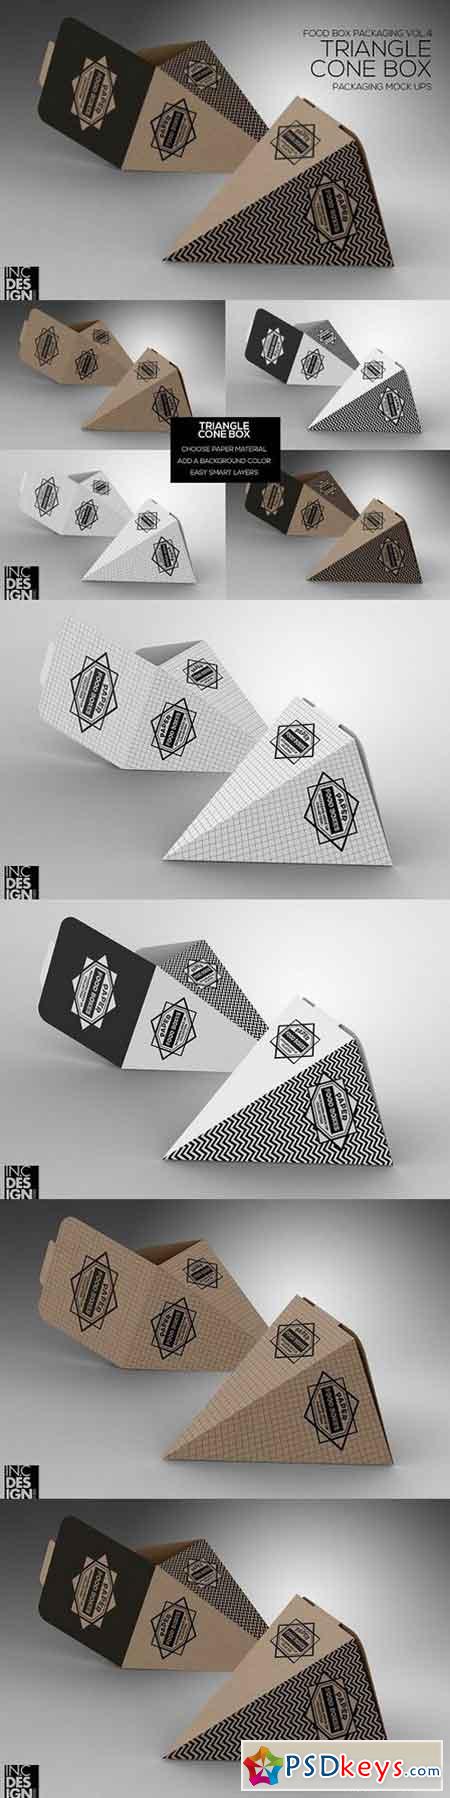 Download Triangle Cone Box MockUp 1296708 » Free Download Photoshop Vector Stock image Via Torrent ...